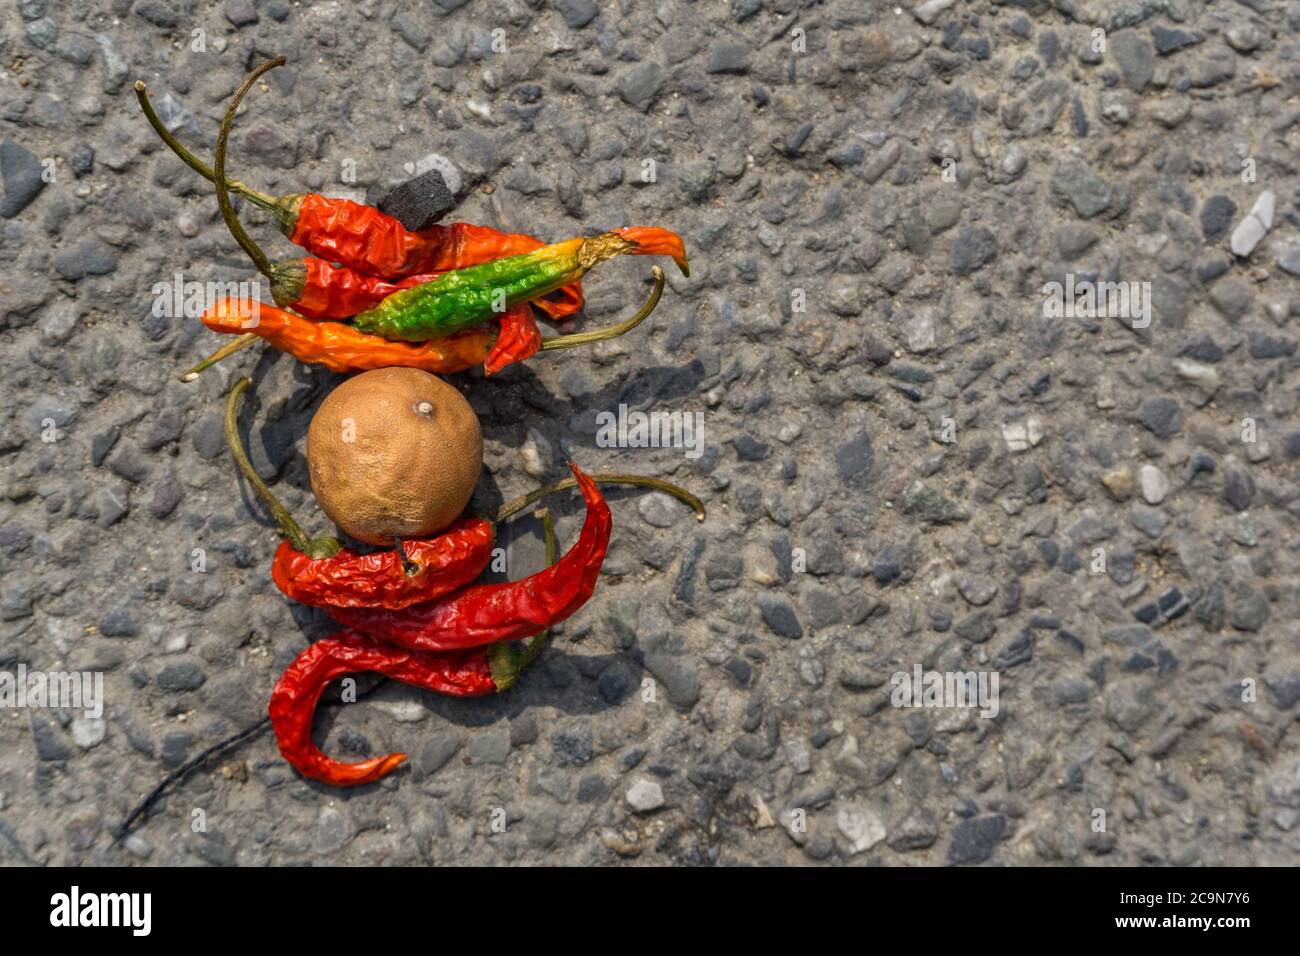 lemon chilli bundle on the street. An old practice of throwing lemon and chilli bundle as a part of taboo in INDIA to avoid bad luck. Stock Photo